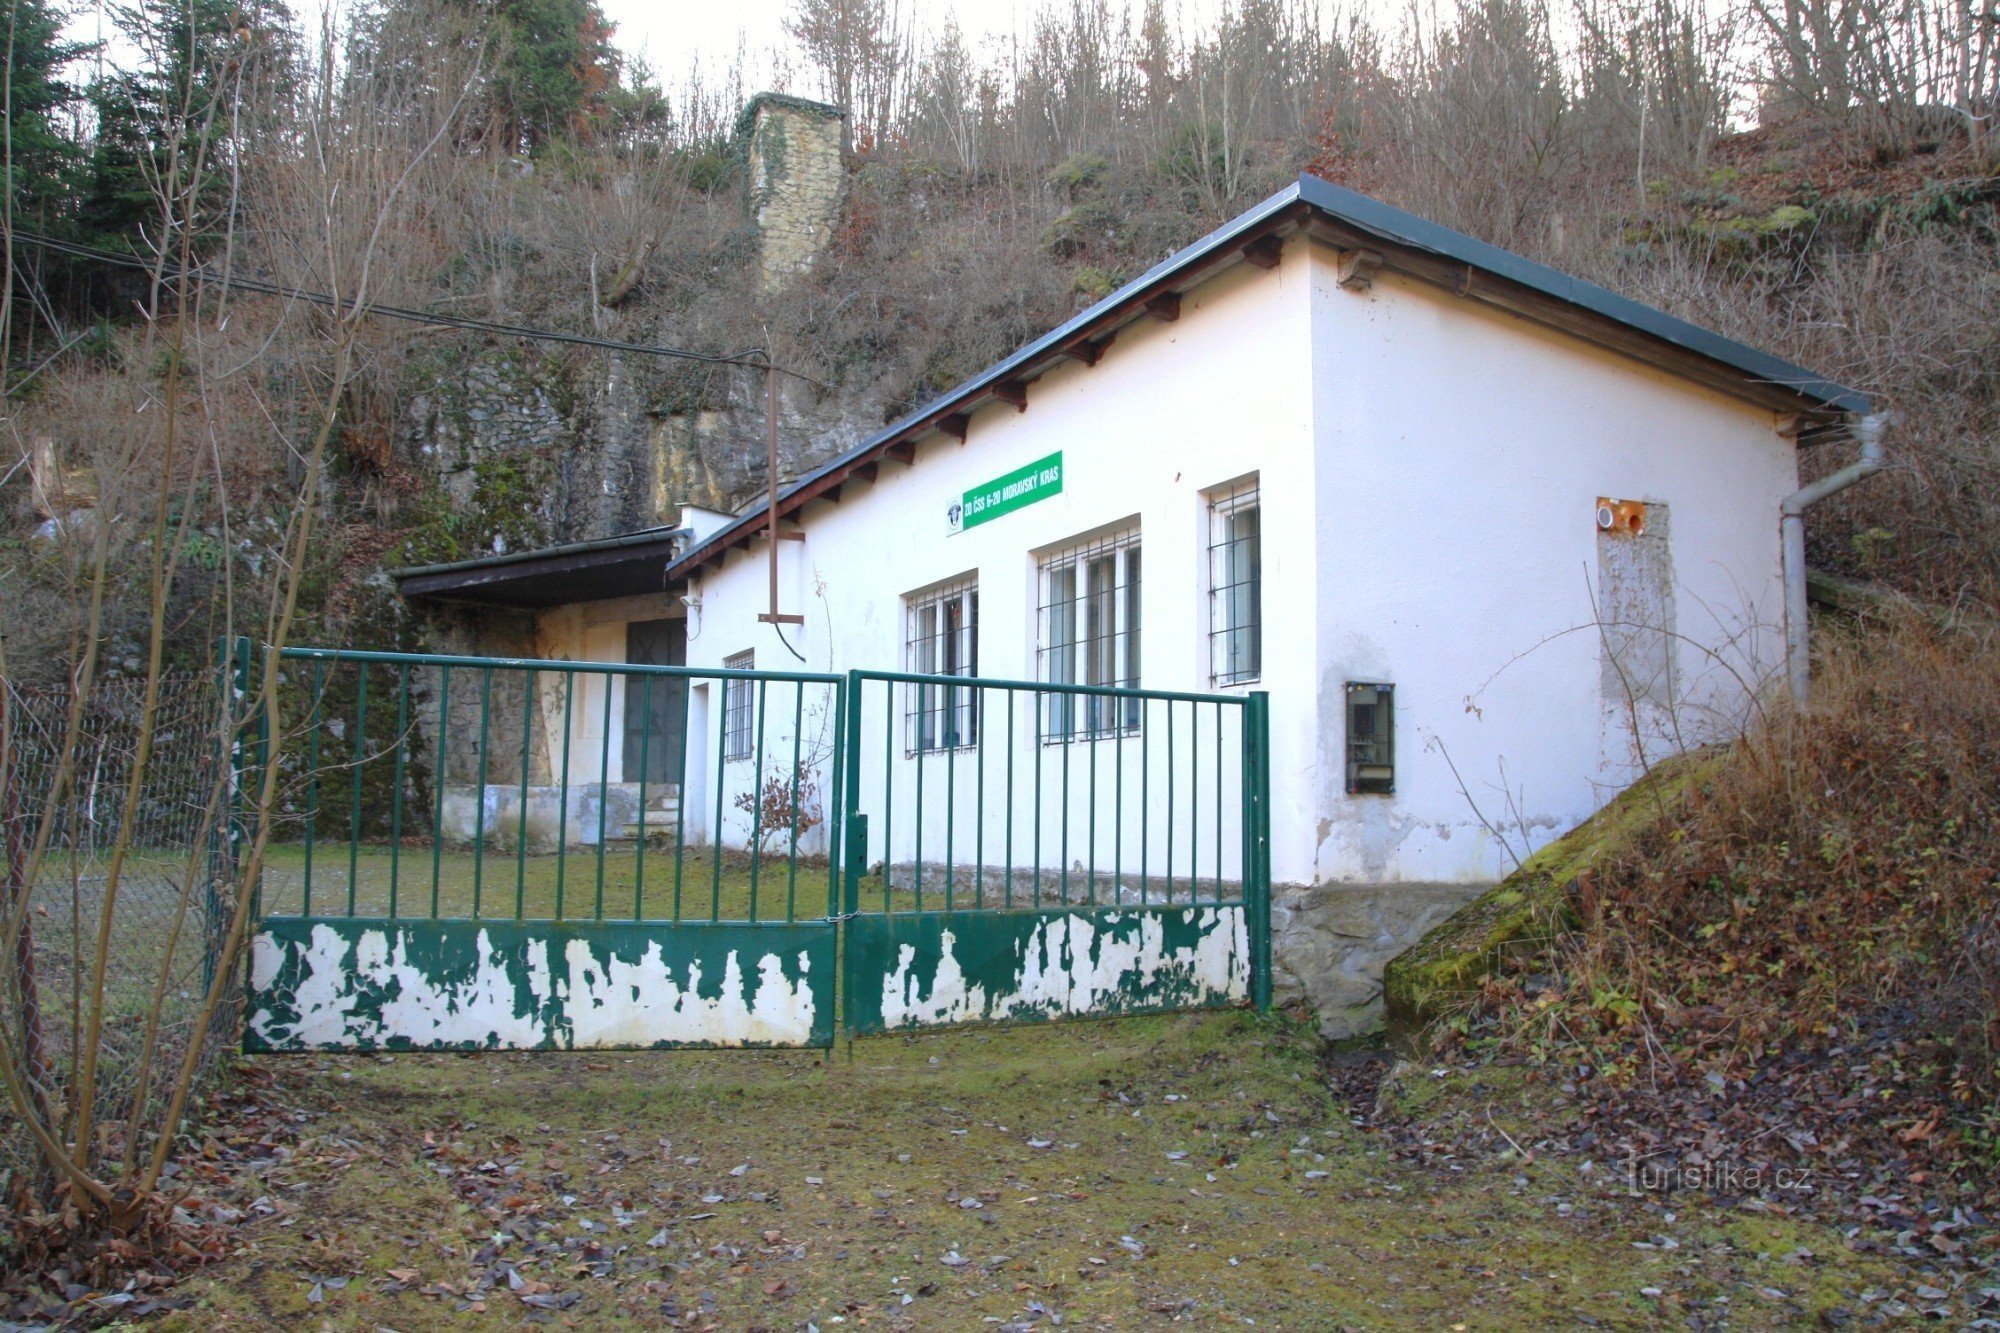 Entrance to the Michálka cave with the former operating building